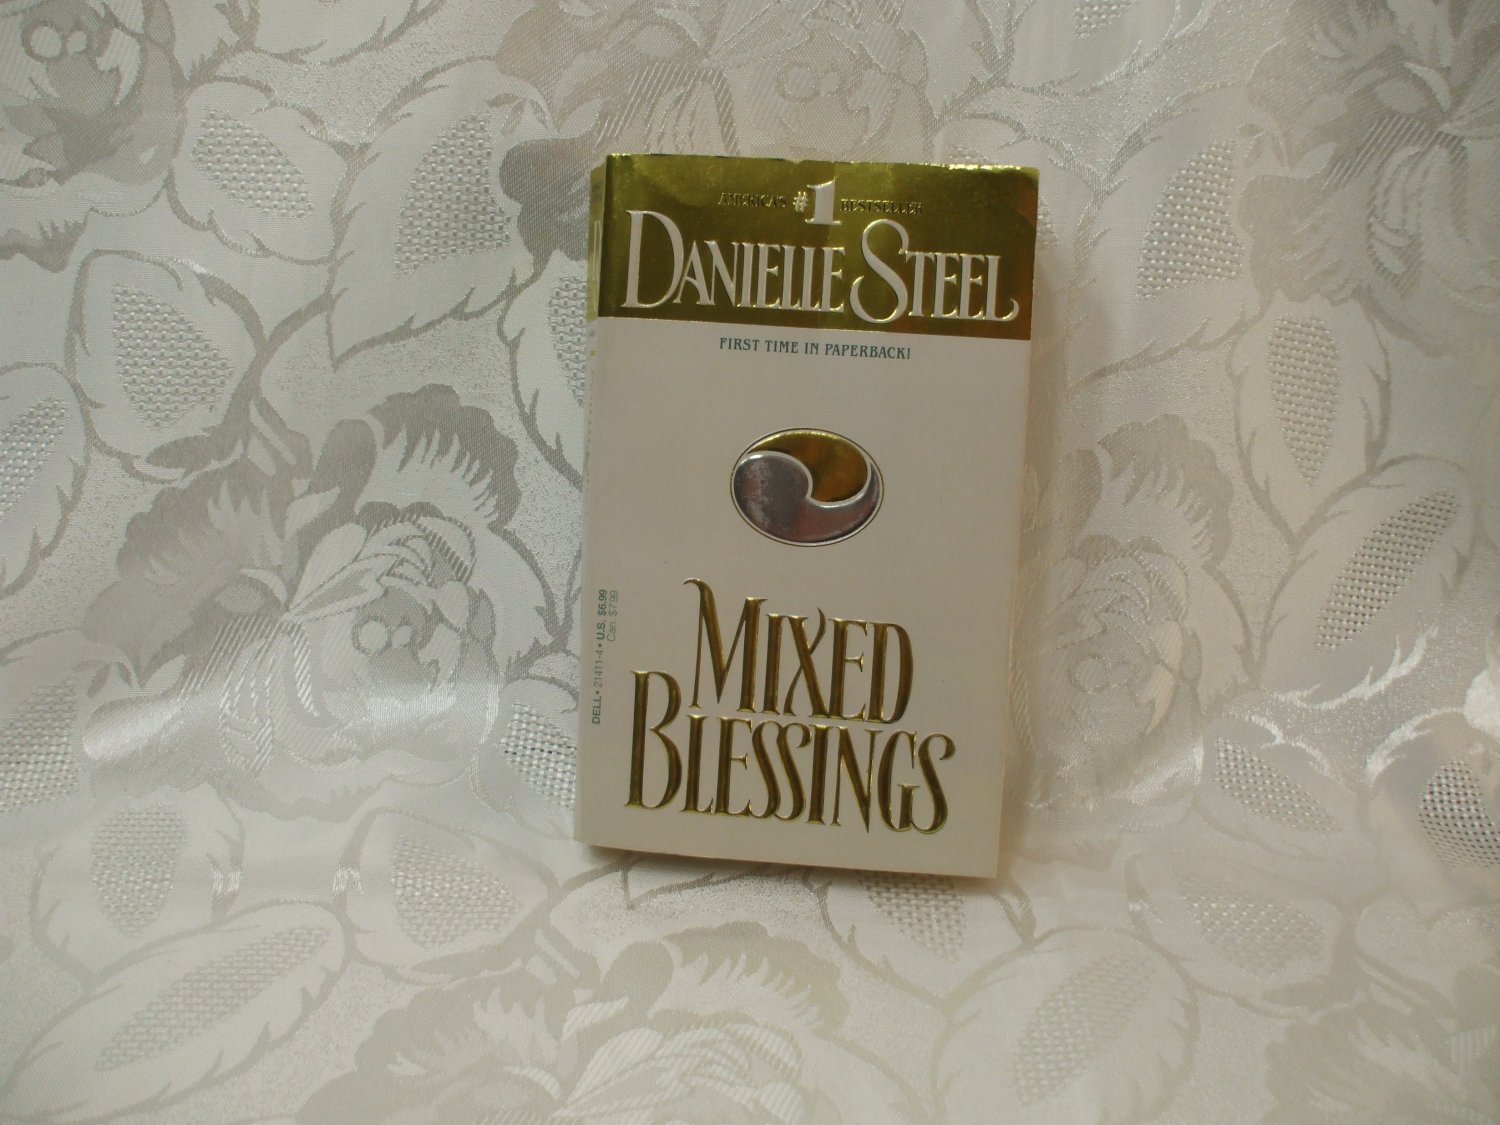 Danielle Steel Mixed Blessings Paperback 416 pages